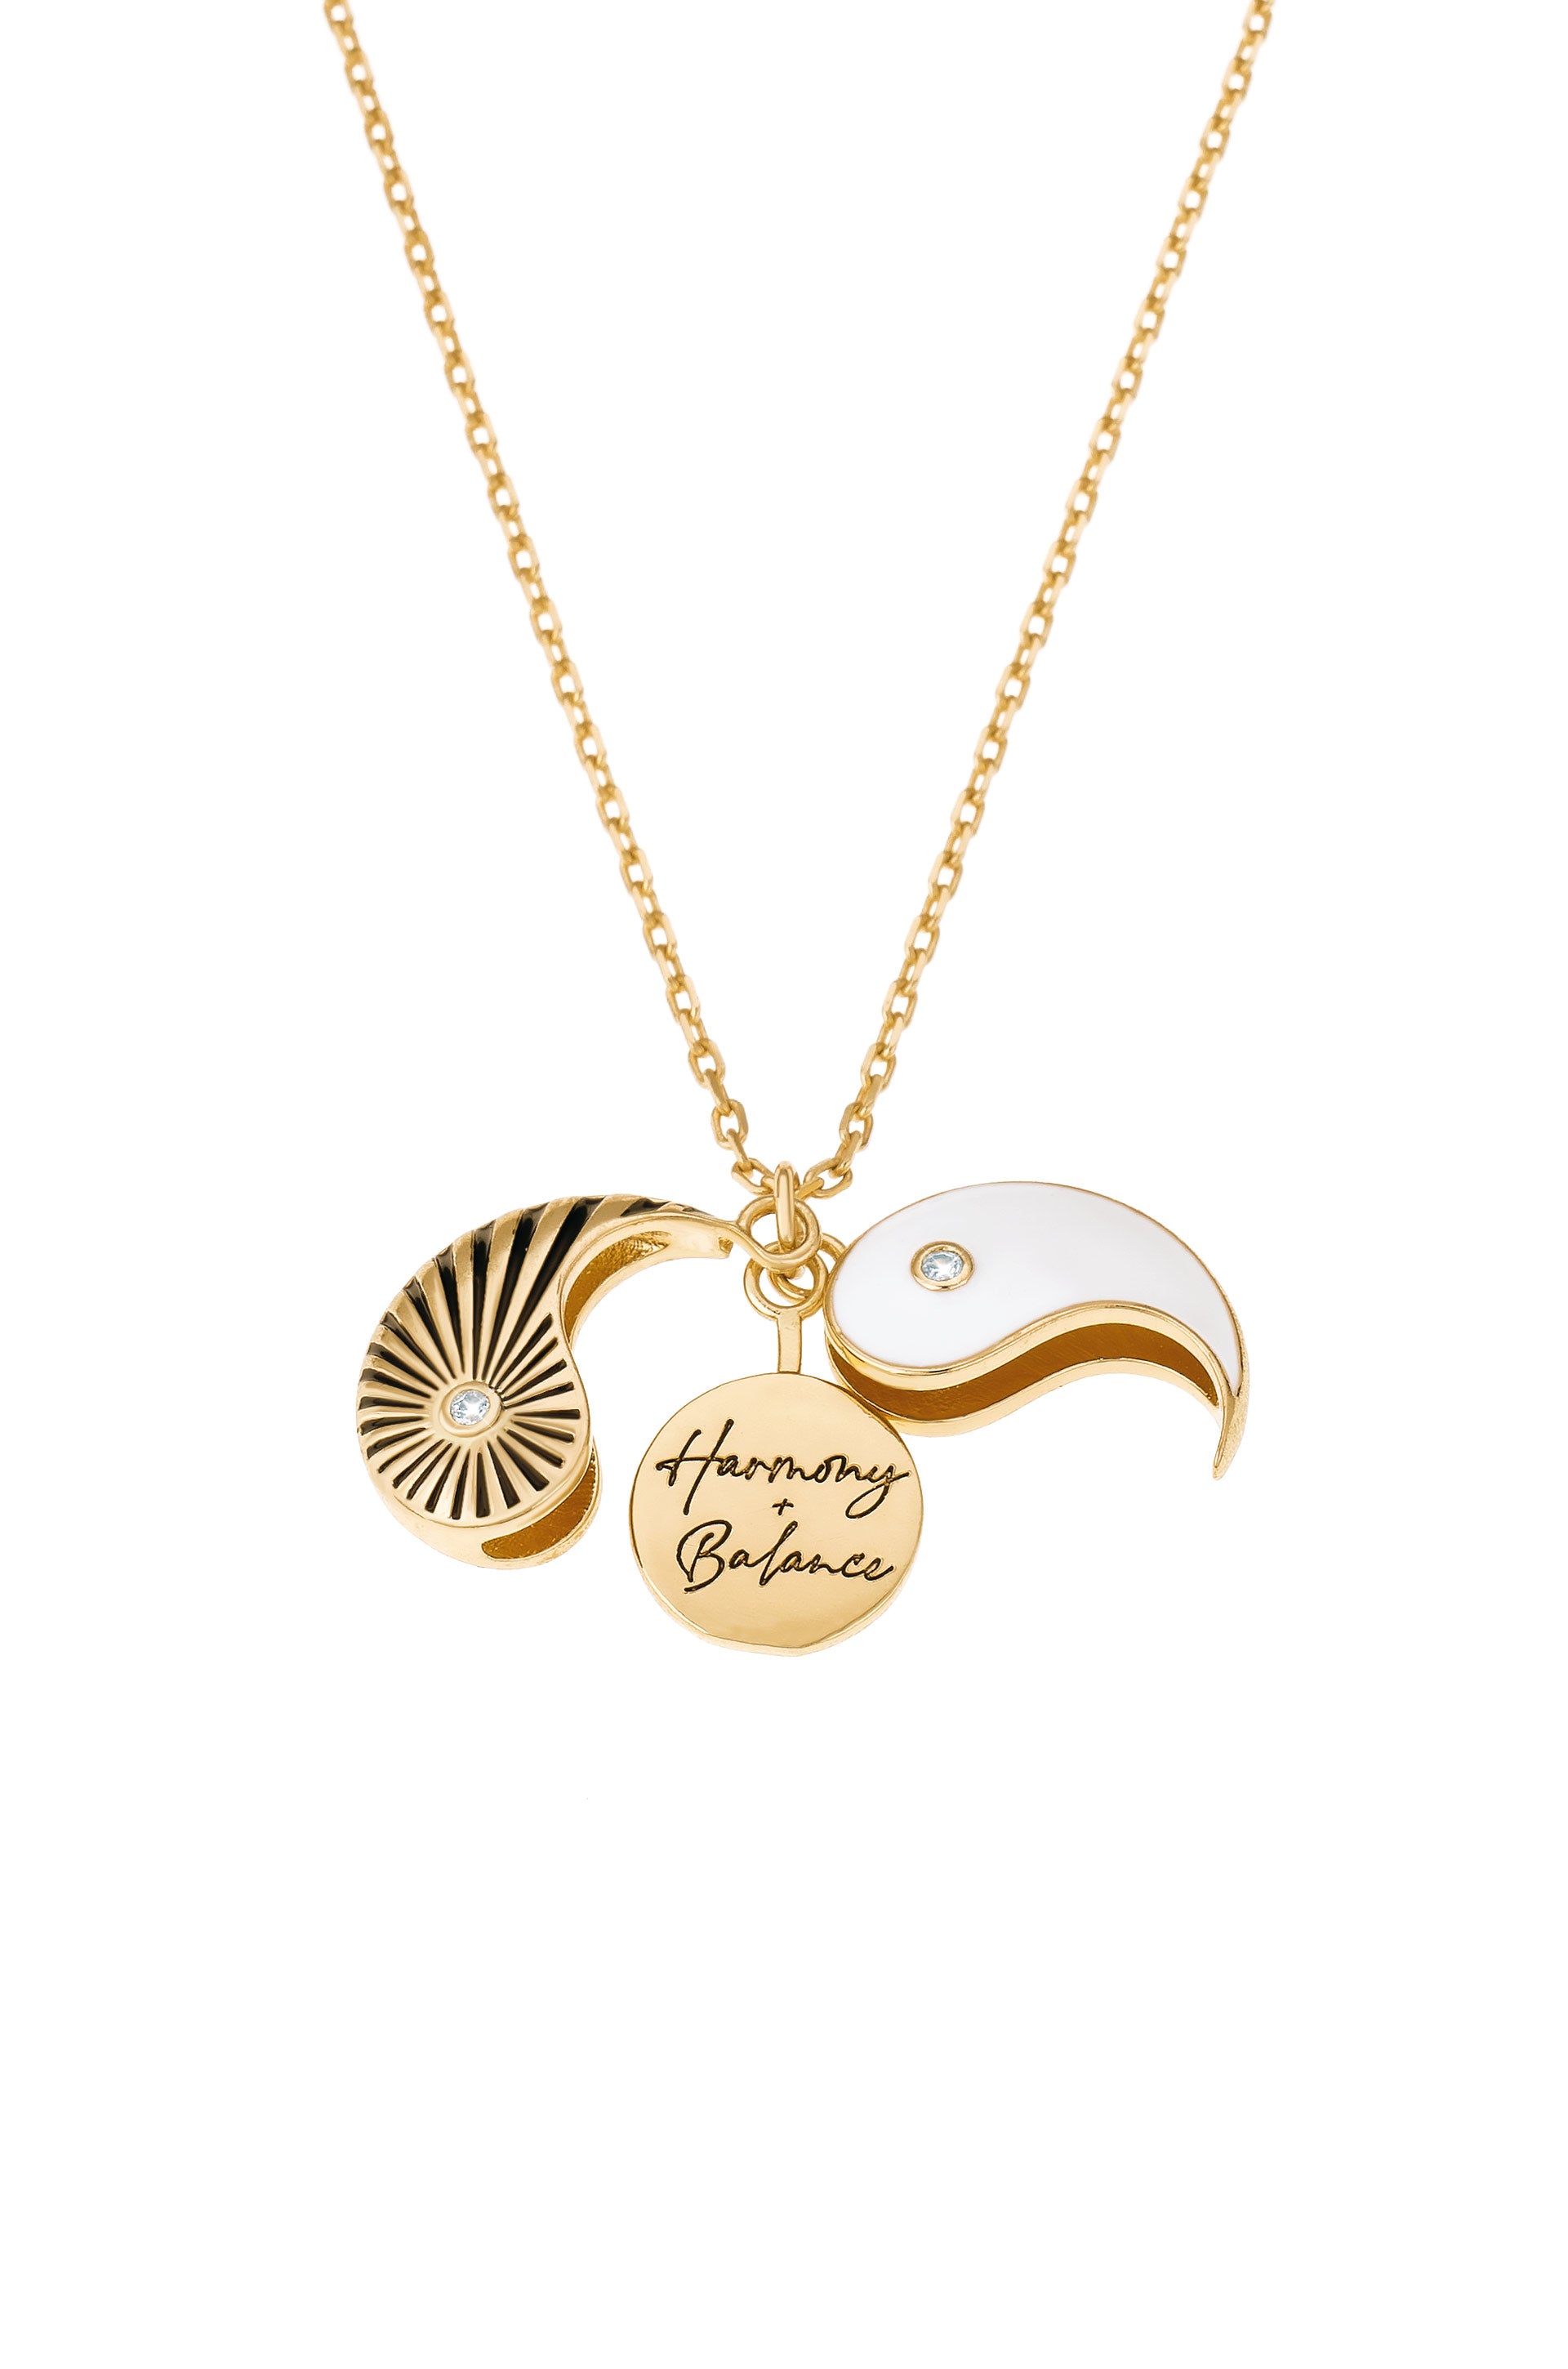 Harmony and Balance Hidden Message Locket Necklace on white close